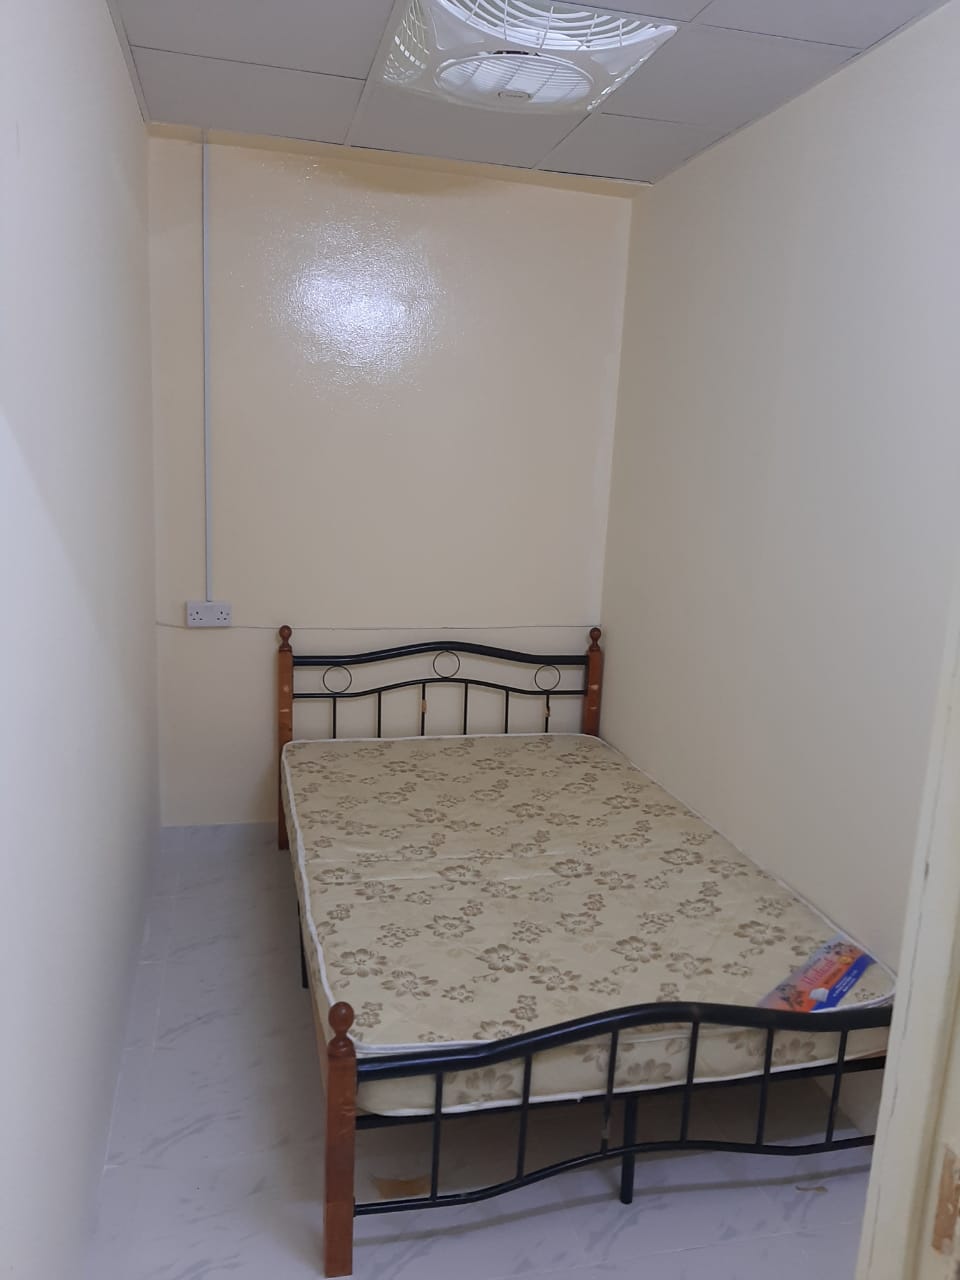 BED SPACE FOR MALE / FEMALE FROM AED 700 ONWARDS NEAR UNION/BANIY